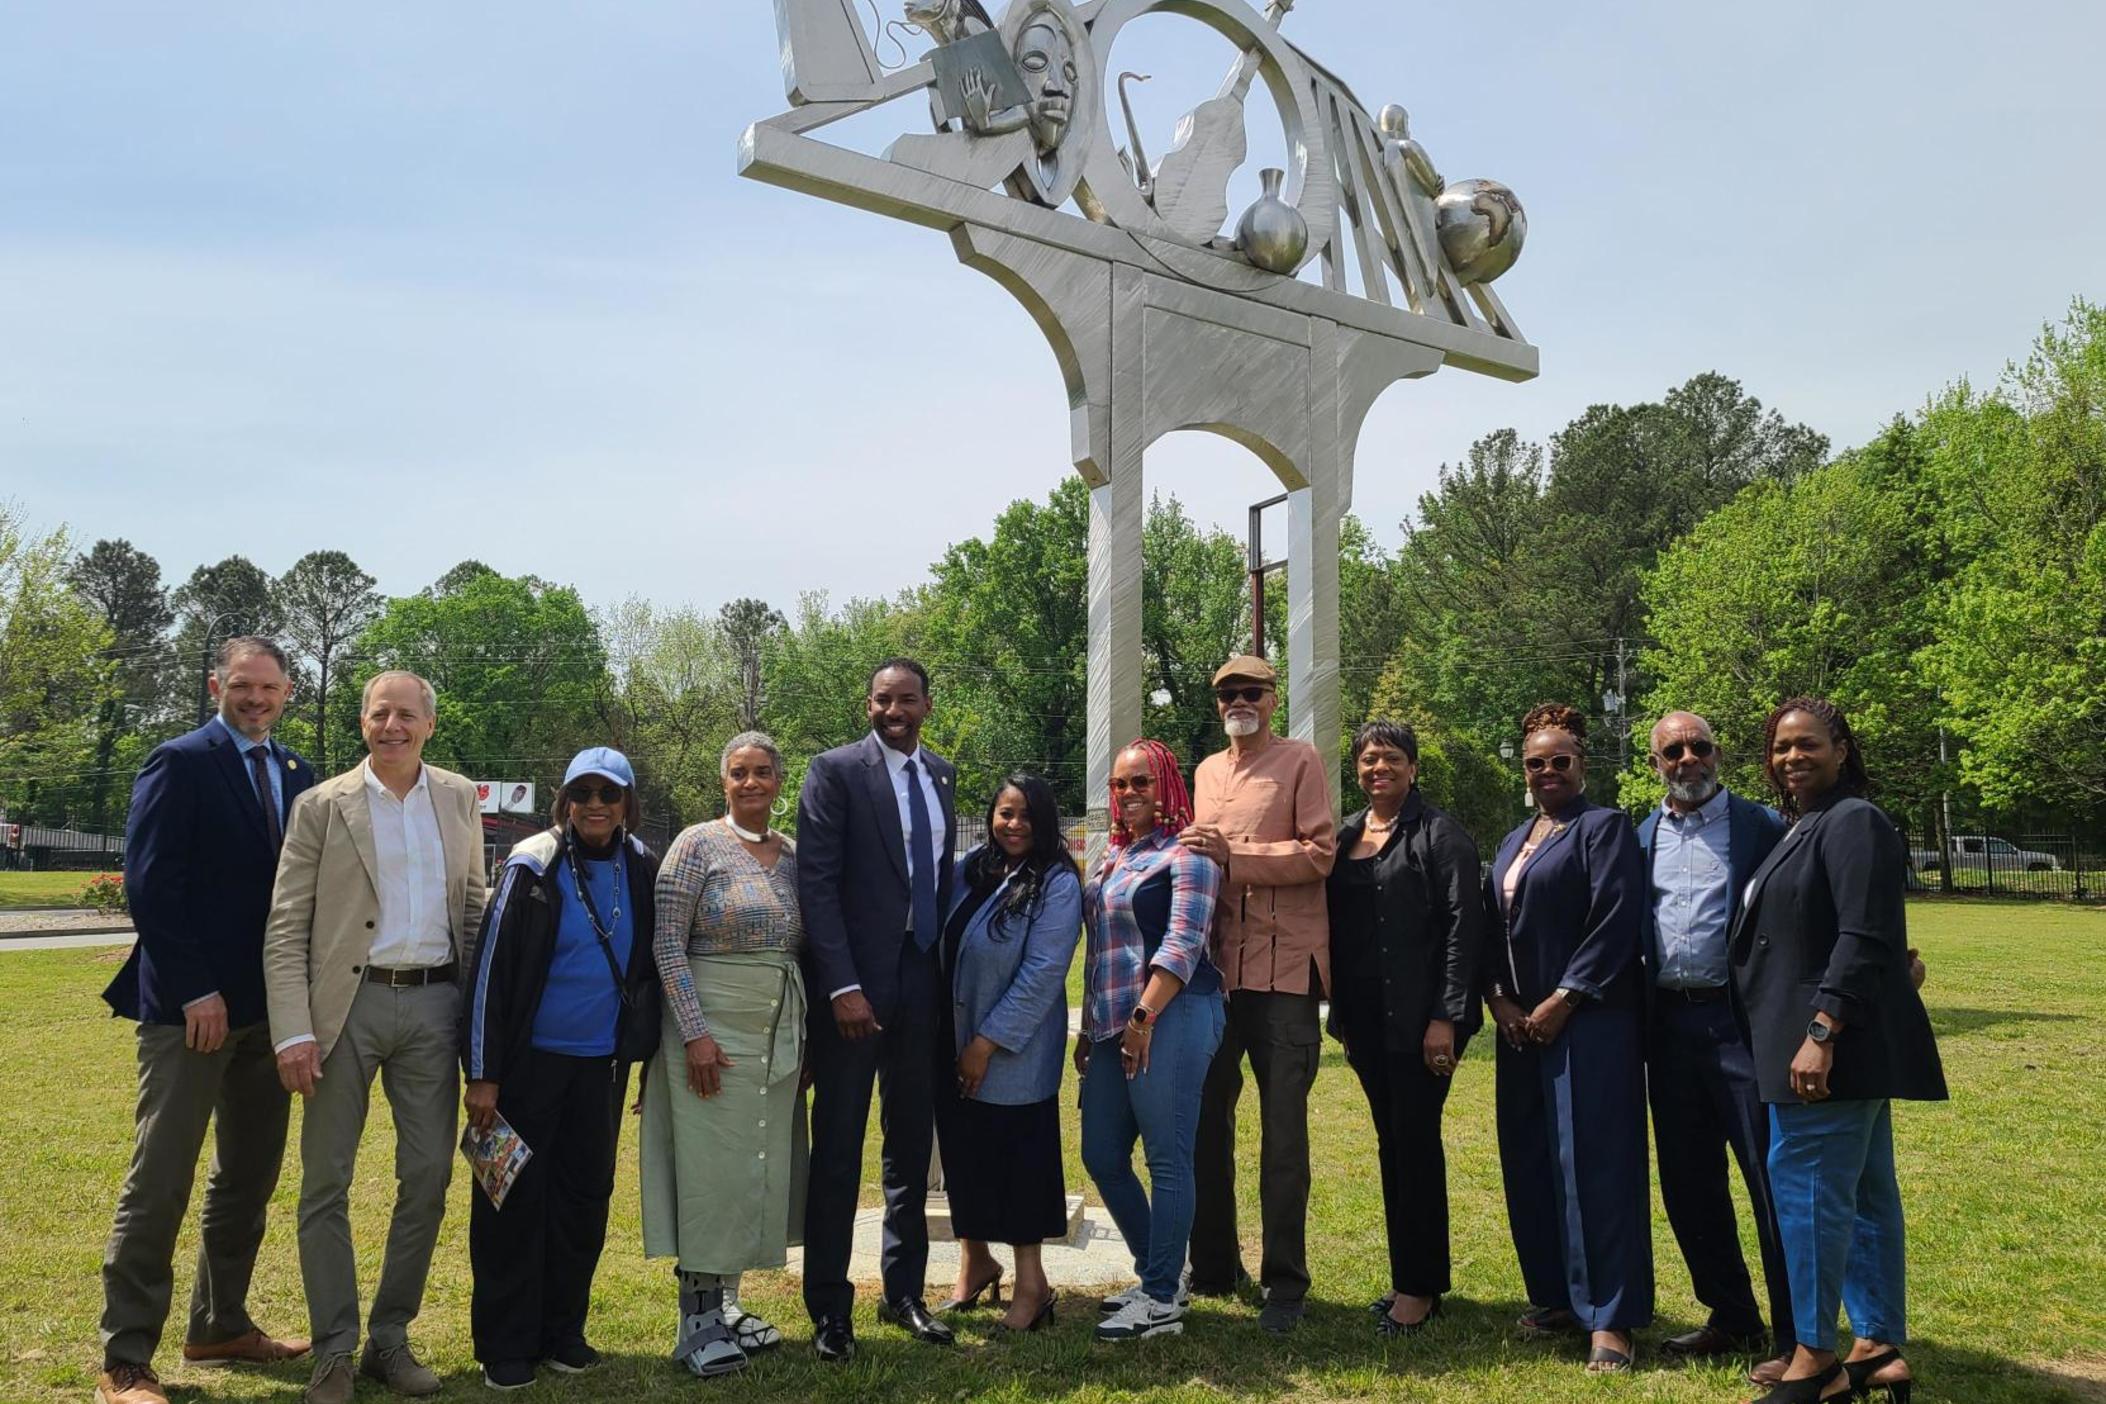 the mayor and a group of artists stand shoulder to shoulder in the grass in front of a large metal monument. It has an arch with a flat top where music objects, a globe, and the face of Martin Luther King are visible on top.